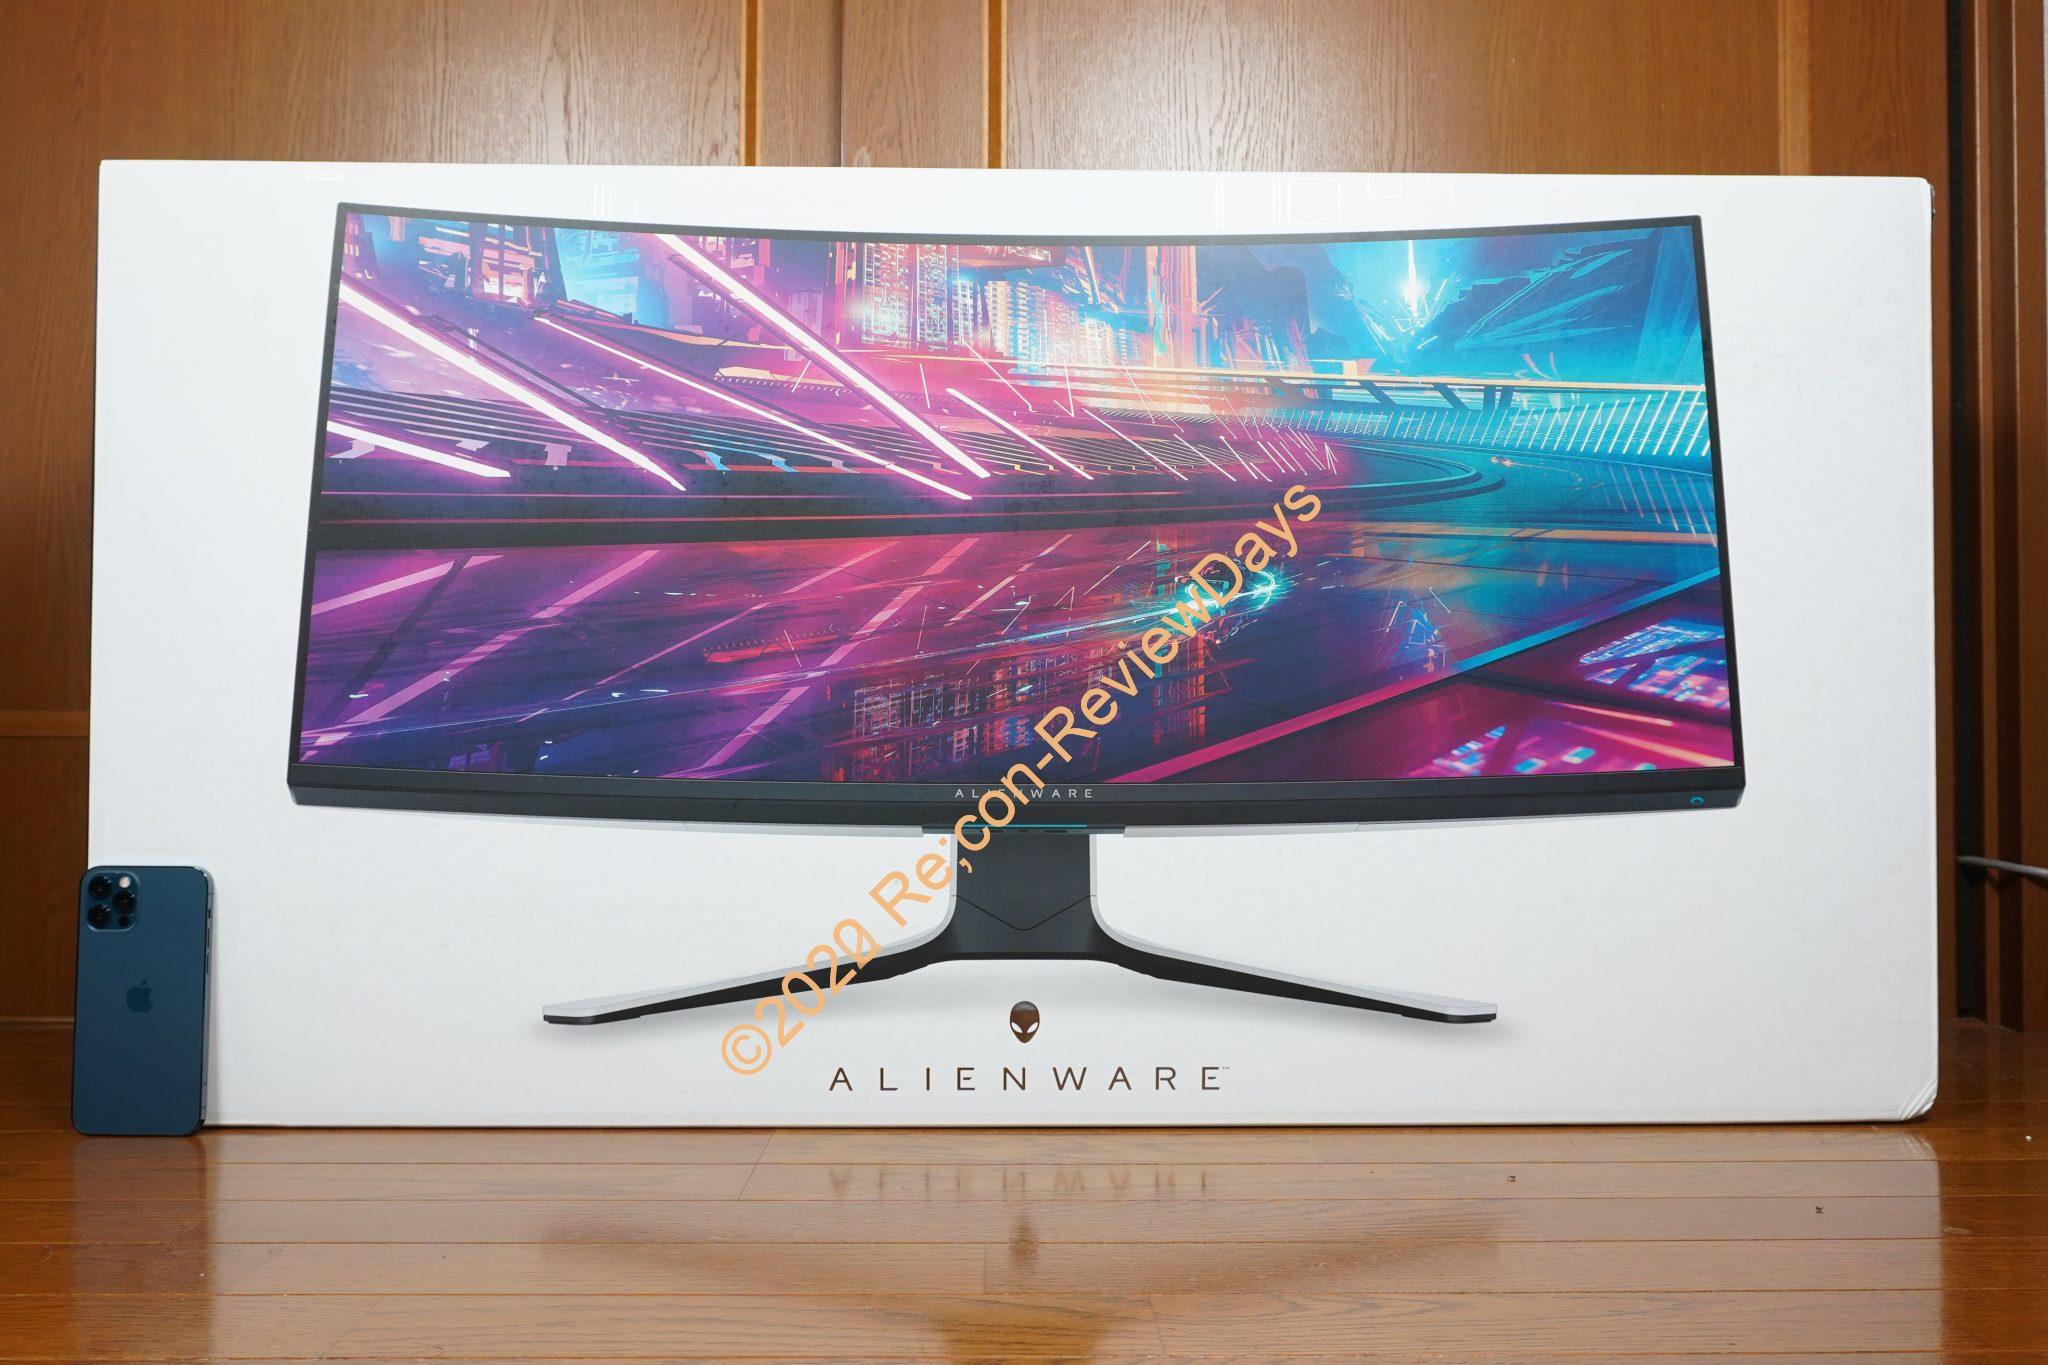 DELL Alienware AW3821DWが突然届きました #DELL #Alienware #AW3821DW #ディスプレイ